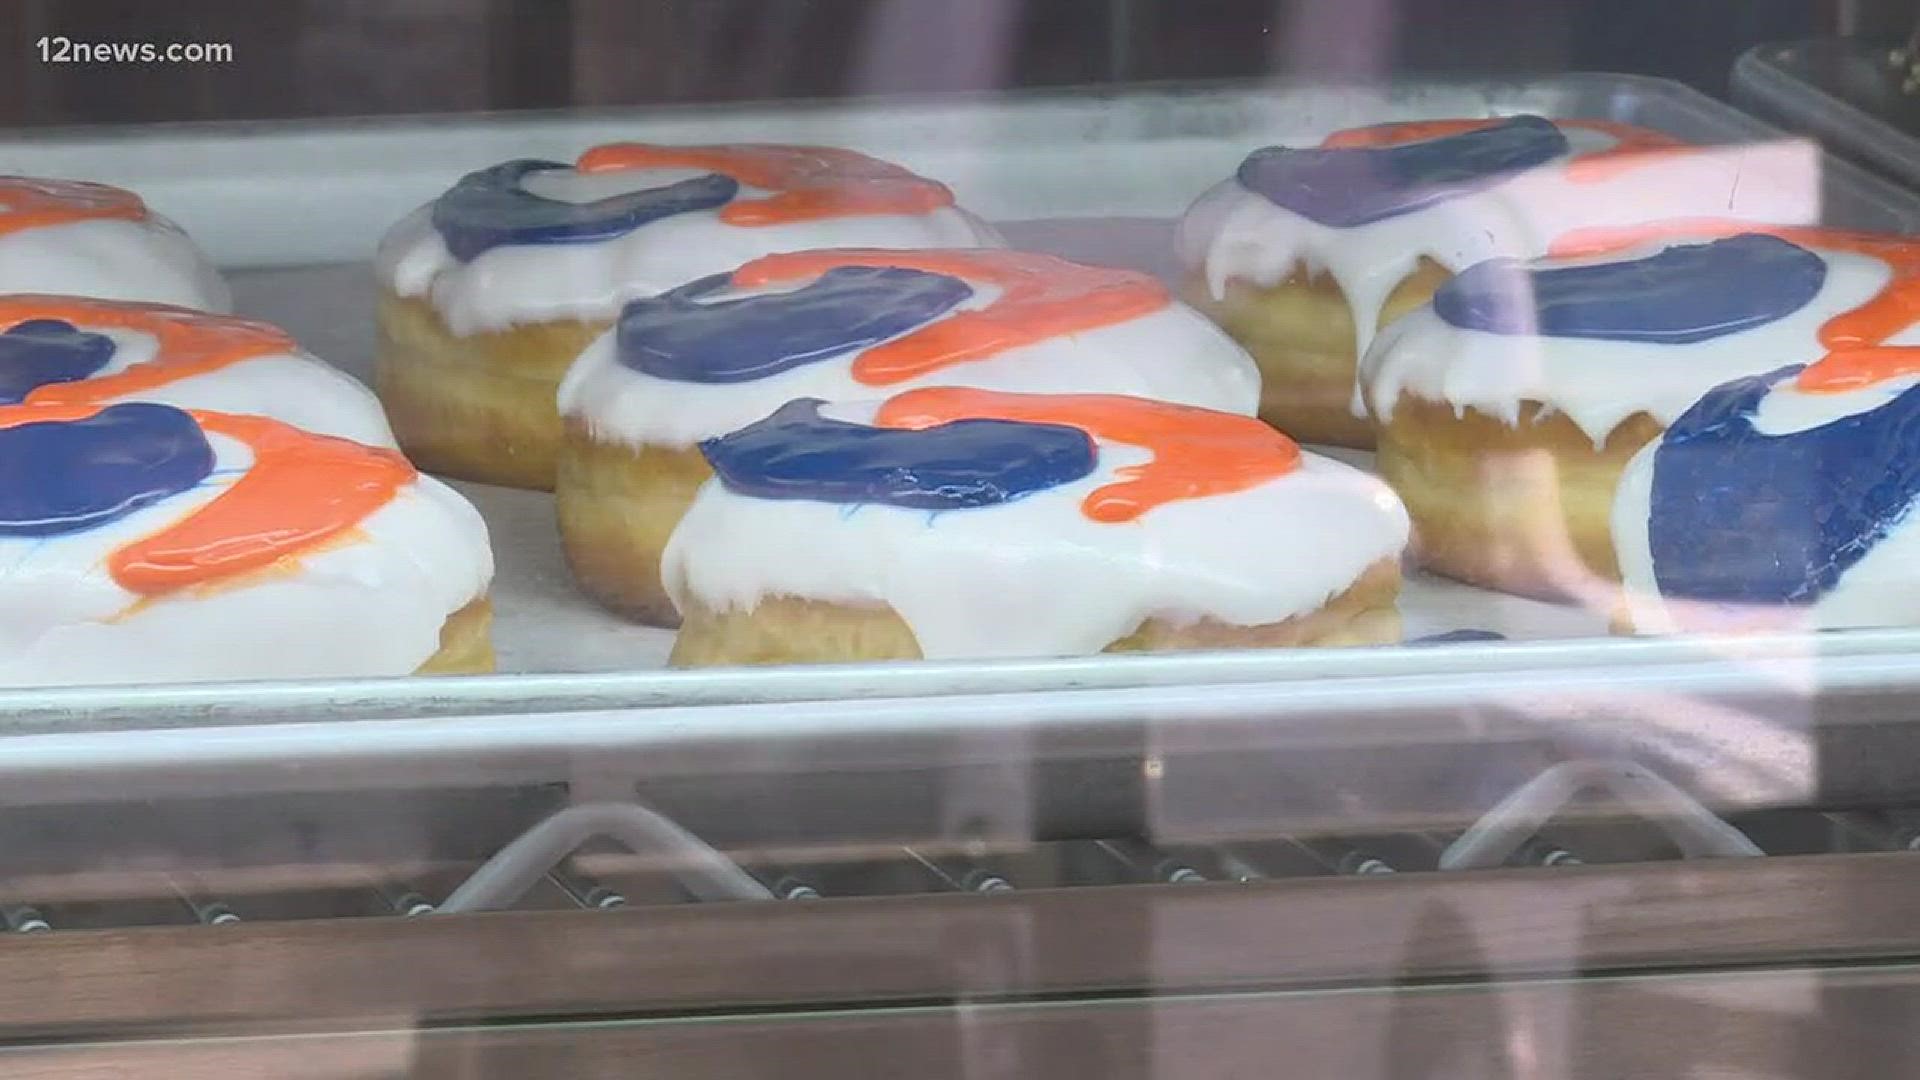 Hurts Donut Company in Tempe is capitalizing on the Tide Pod challenge with a donut filled with "forbidden fruit" jelly.